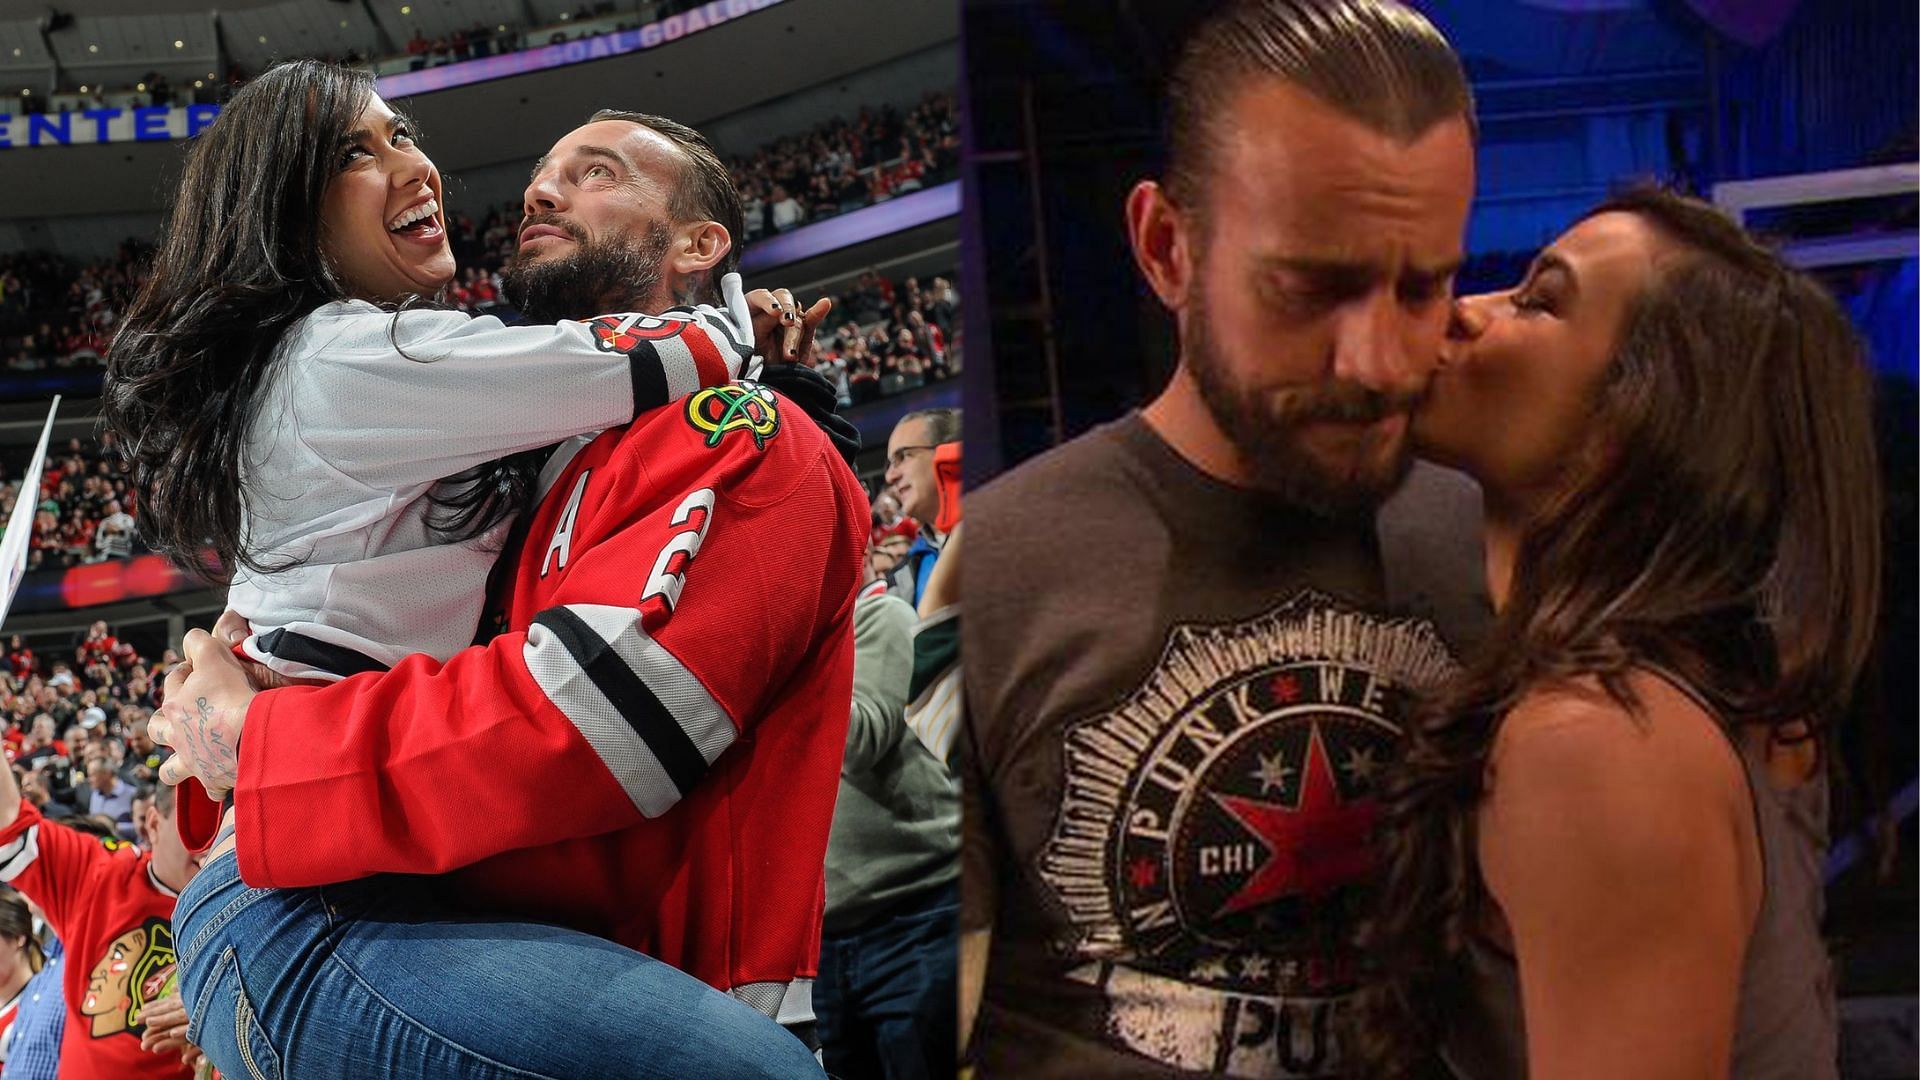 Will AJ Lee ever join CM Punk in AEW?